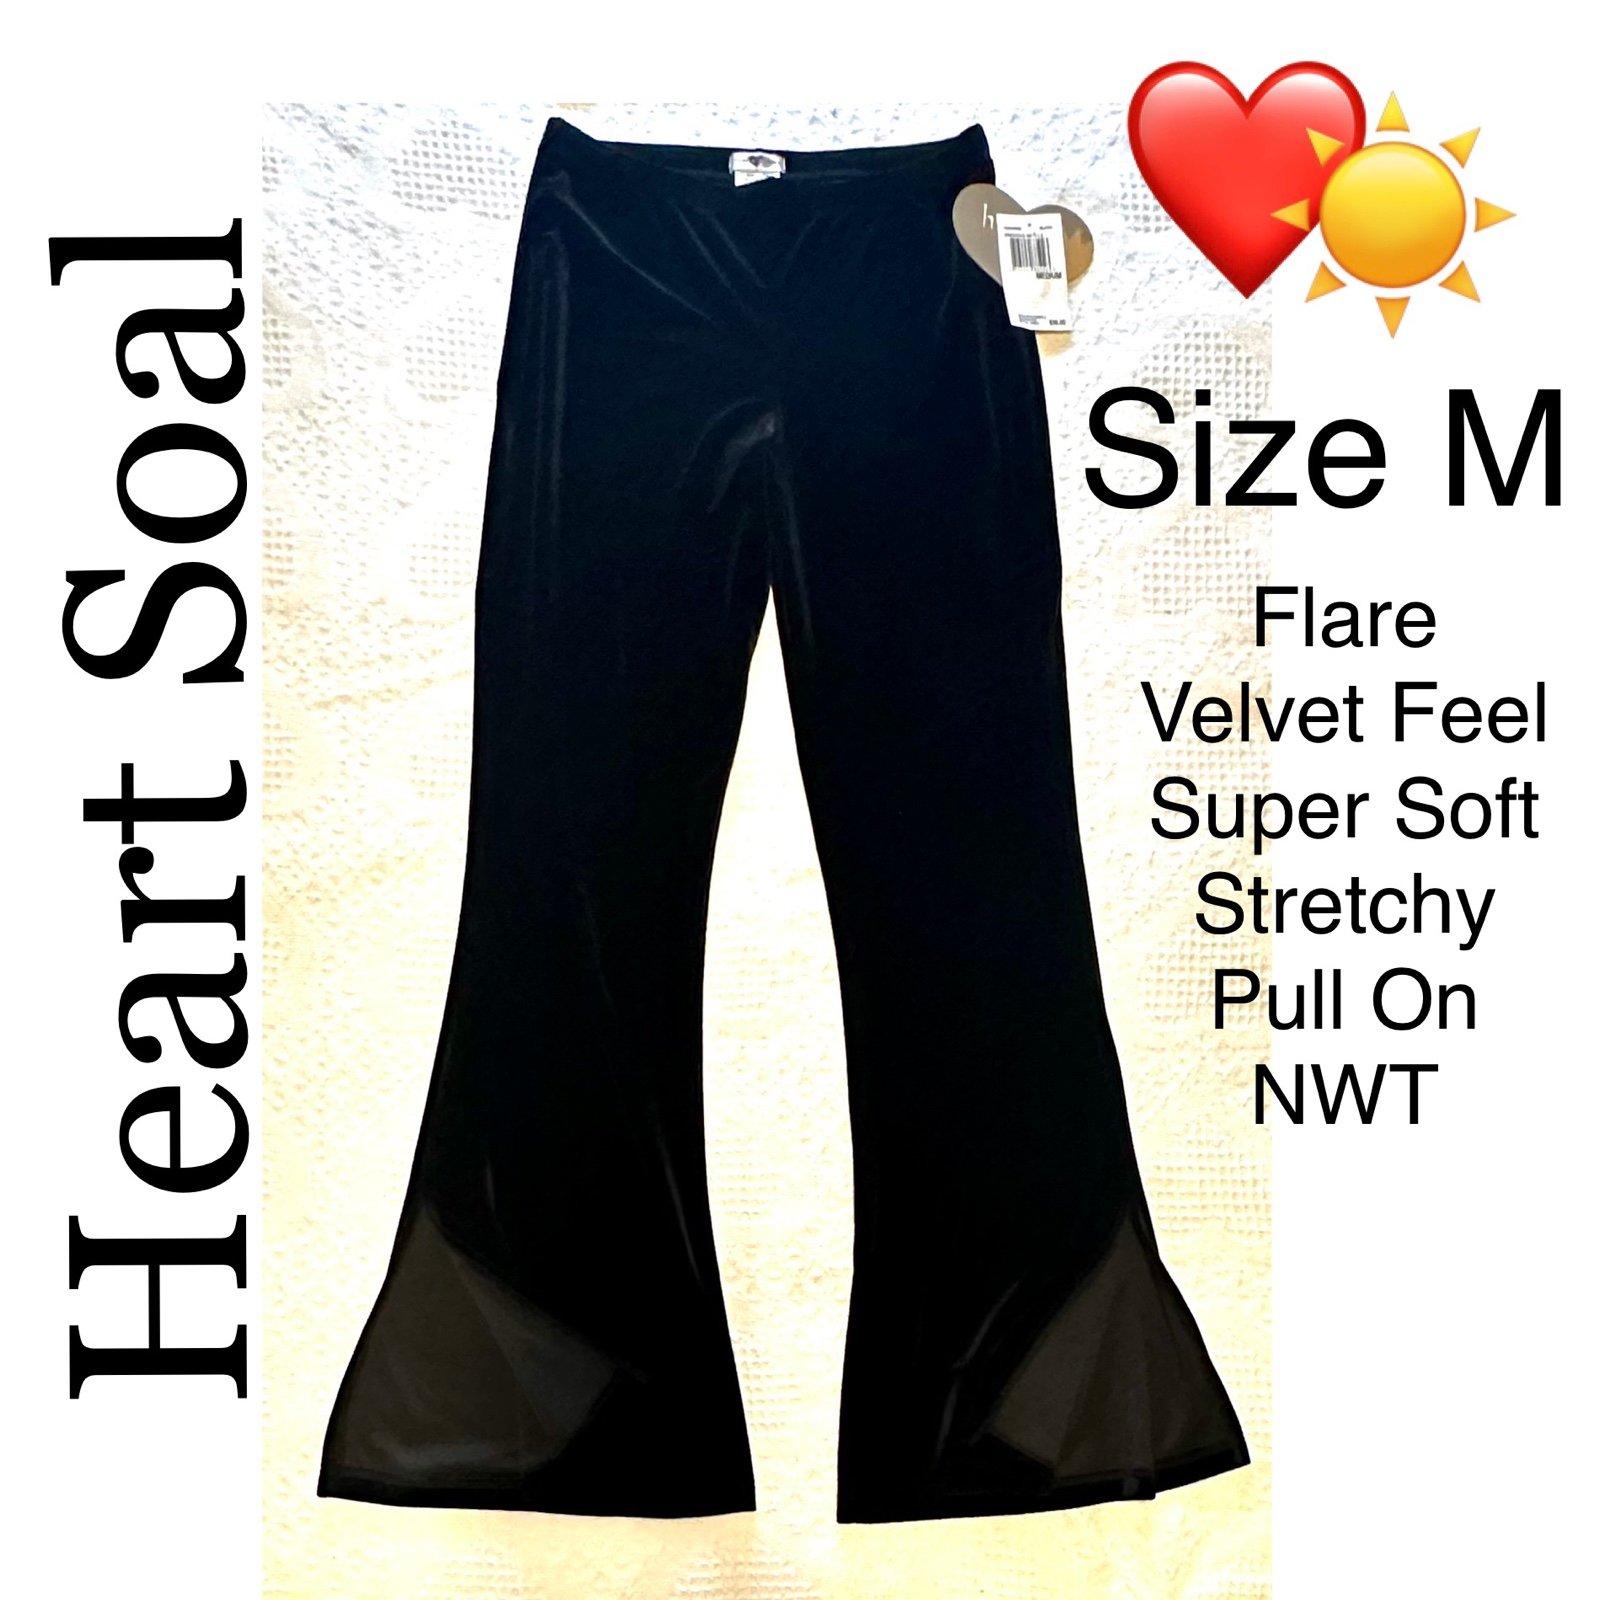 Beautiful NWT M Velvet Lightweight Stretchy Flare Pants